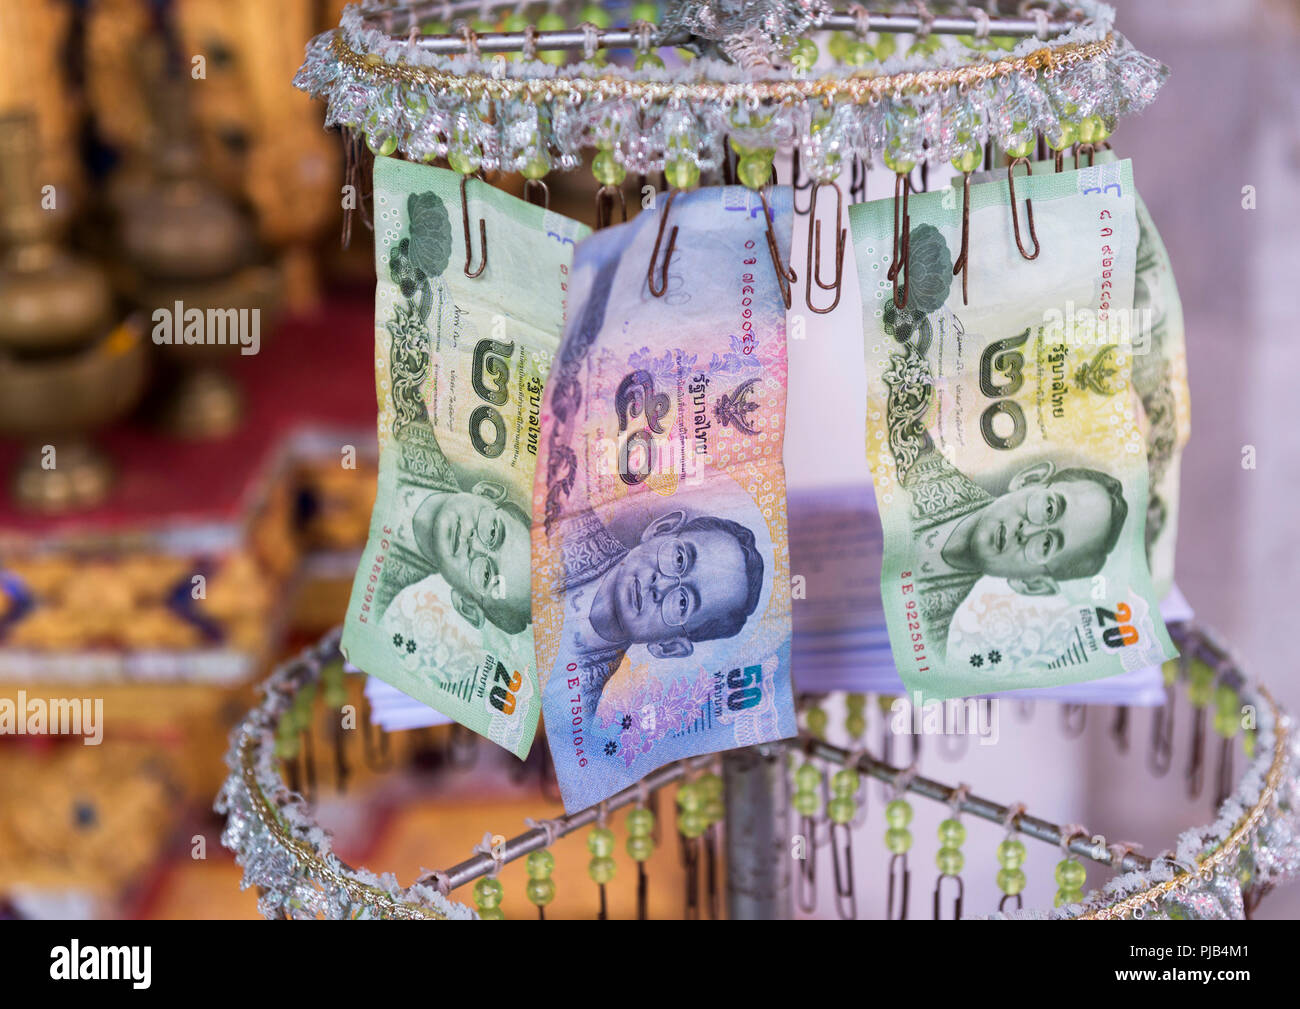 Wat Bang Riang Temple, That Put, Phang Nga Province, Thailand - Thai Banknotes given to the Monks at the temple Stock Photo